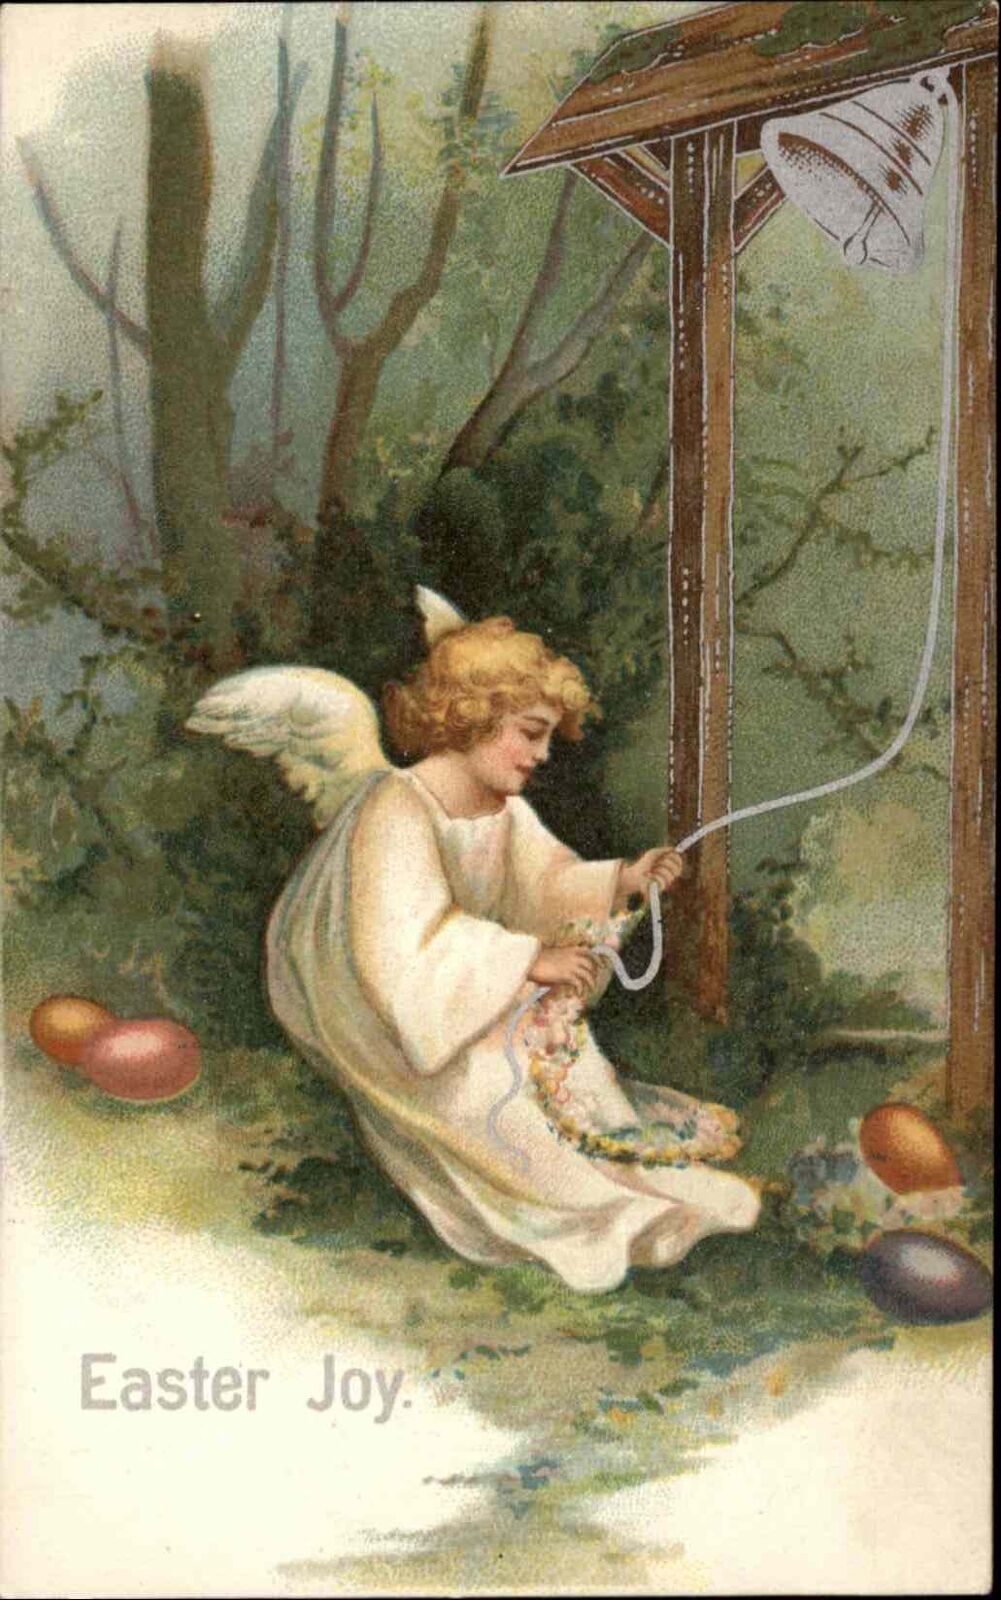 Easter Angel Rings Bell Misch & Co Easter Chimes Series c1900s-10s Postcard